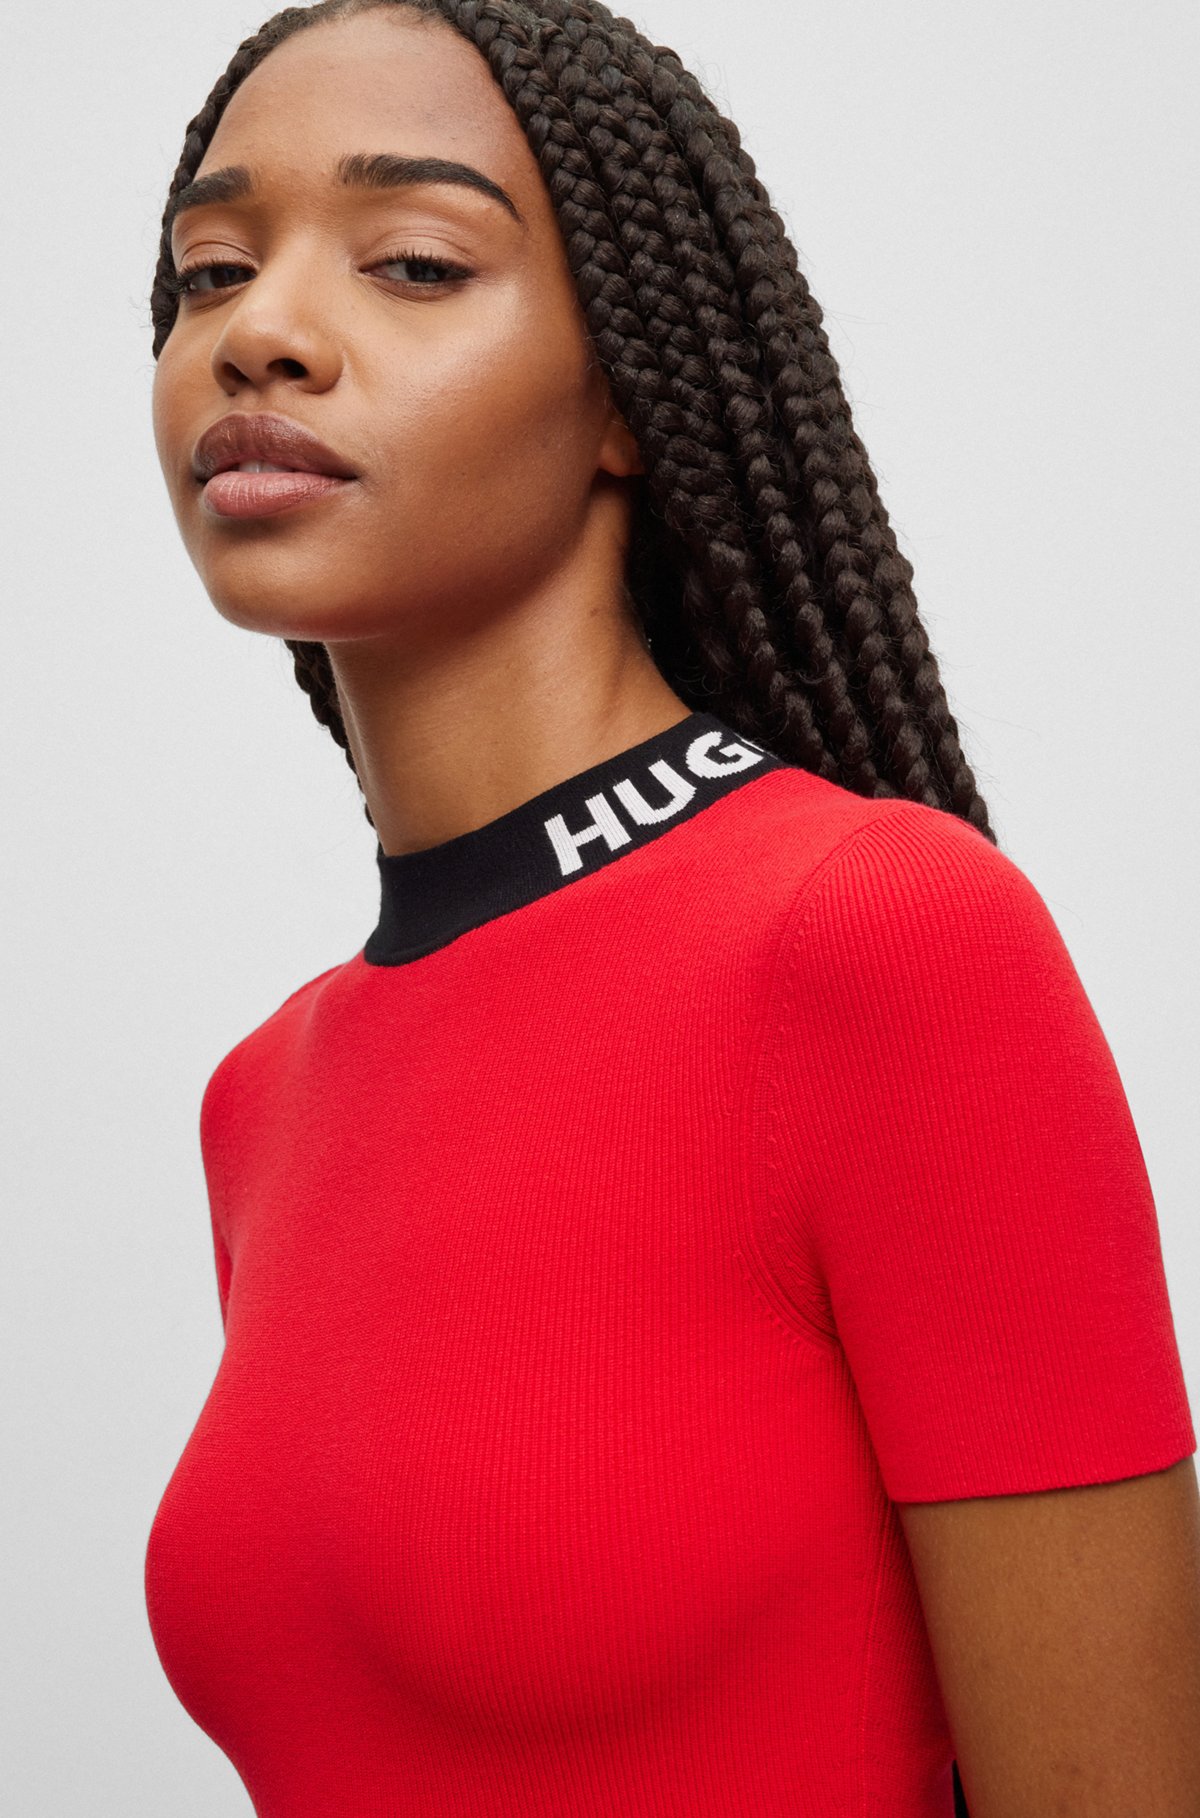 Short-sleeved knitted dress with logo collar, Red